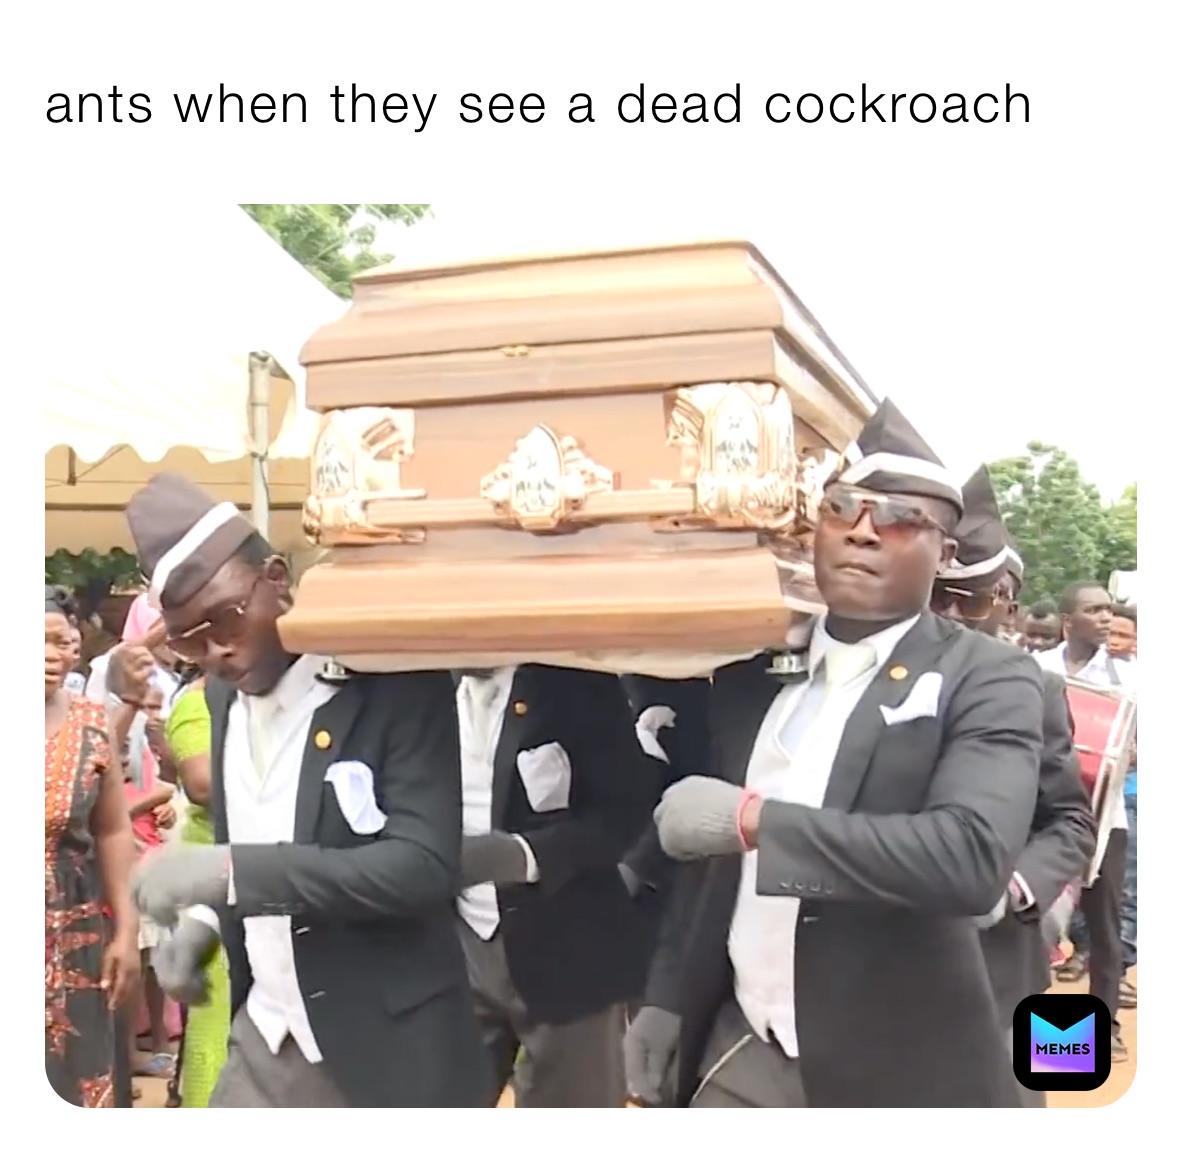 ants when they see a dead cockroach